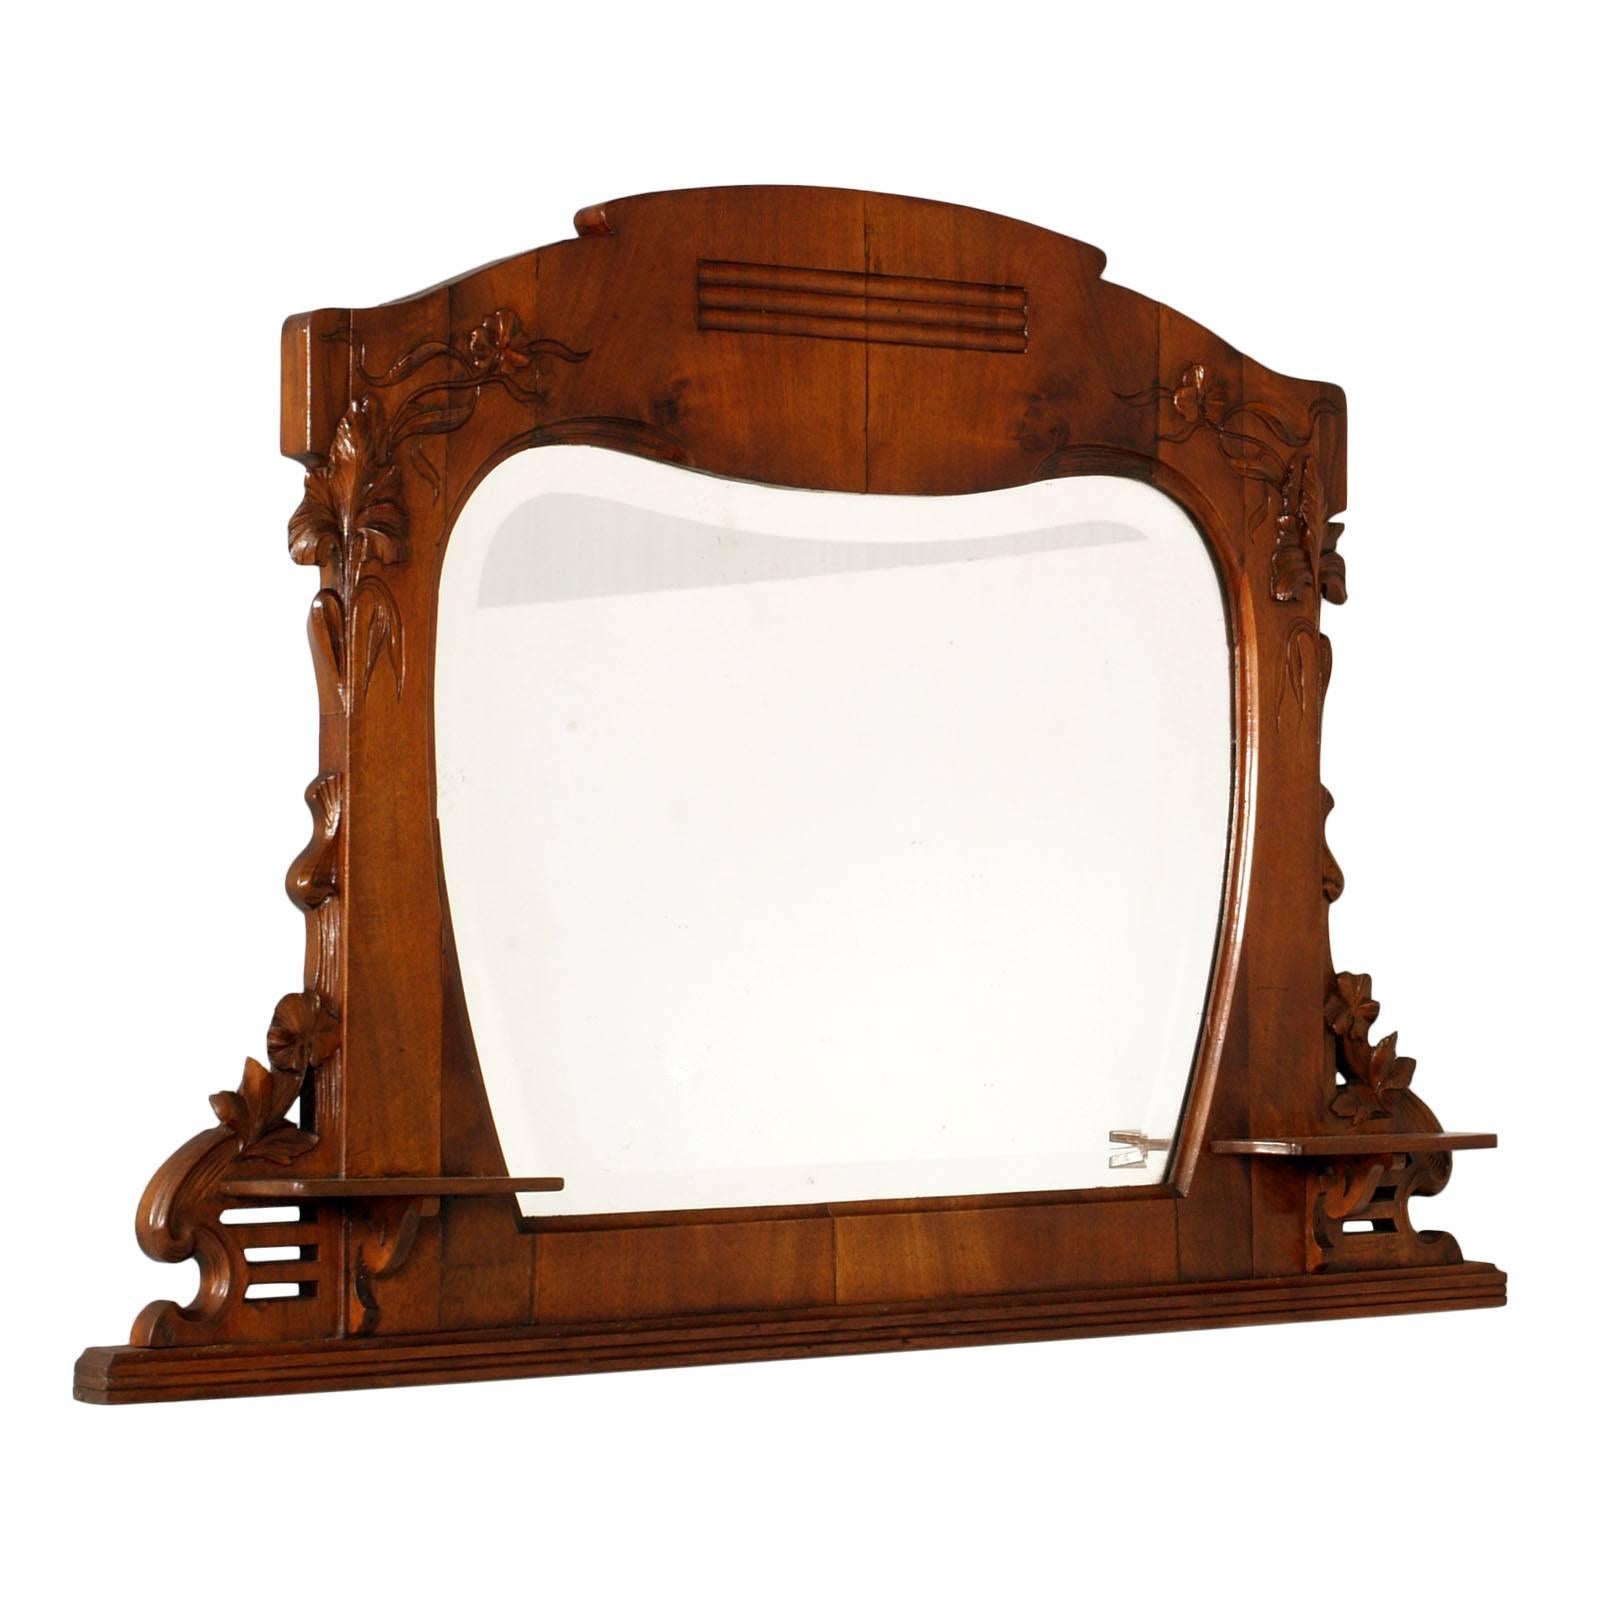 Early 20th Century Mirror Art Nouveau by Testolini & Salviati, Carved Walnut For Sale